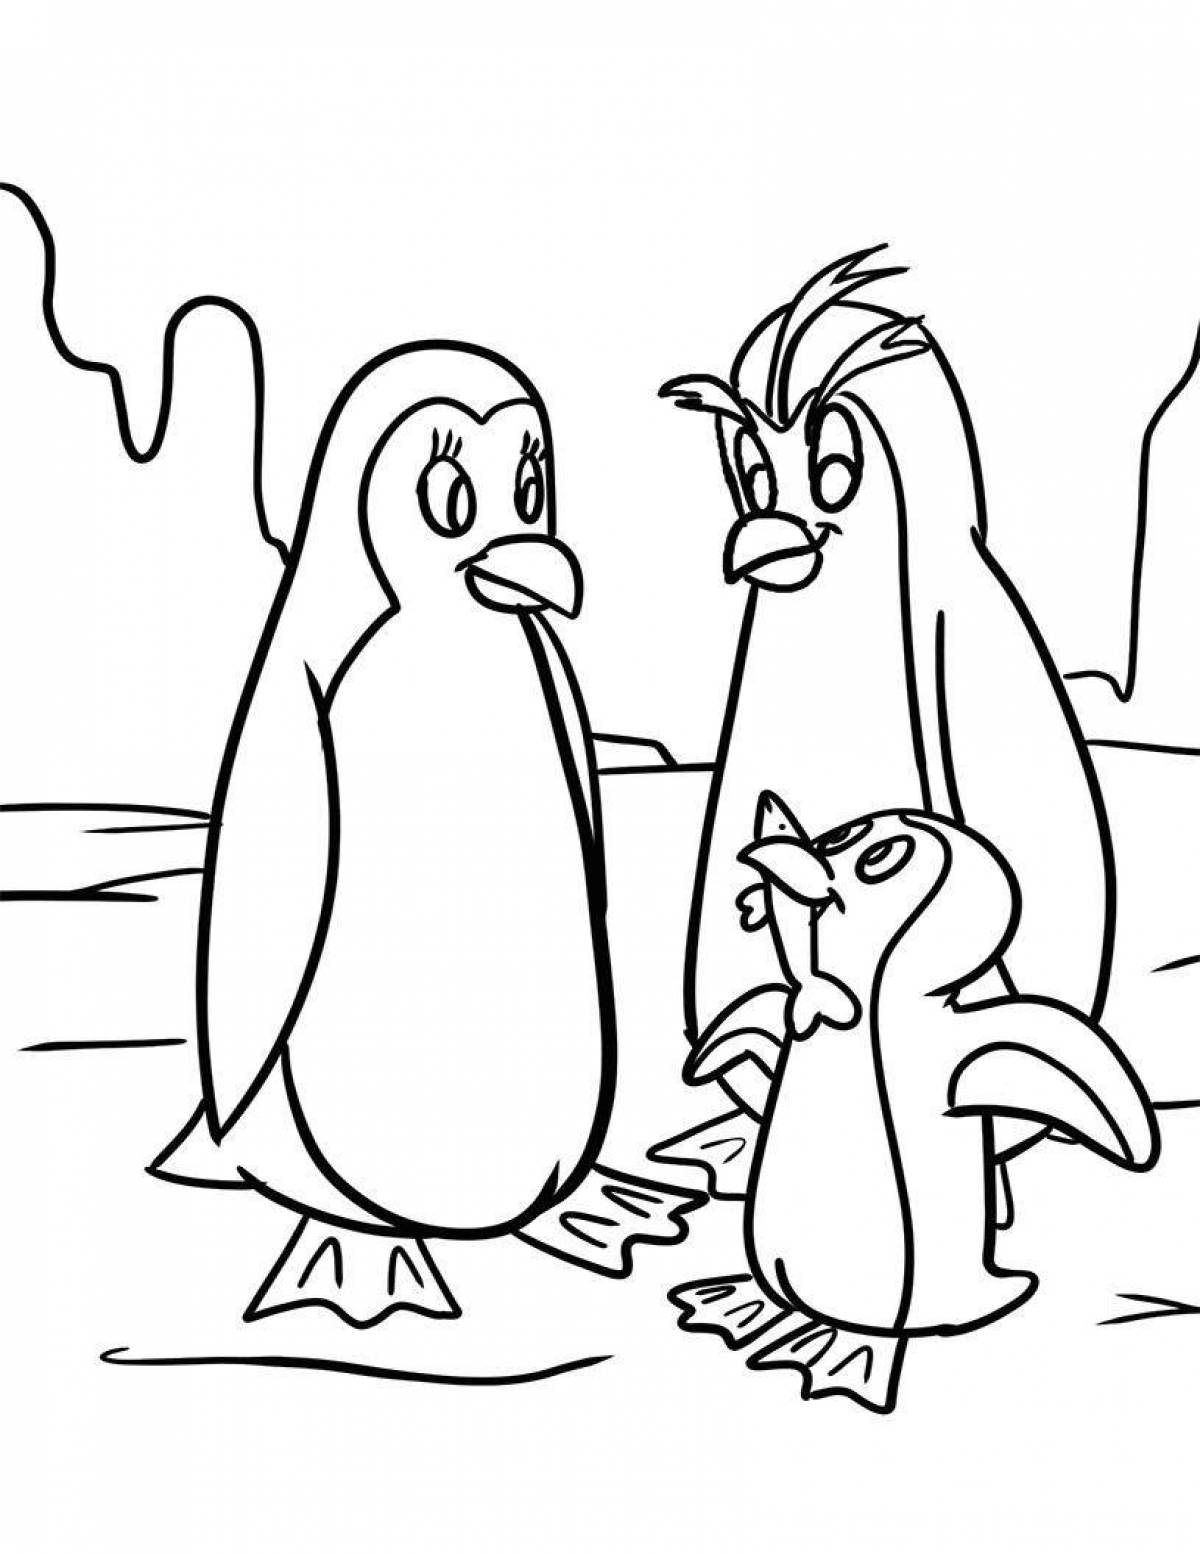 Sassy coloring funny penguin